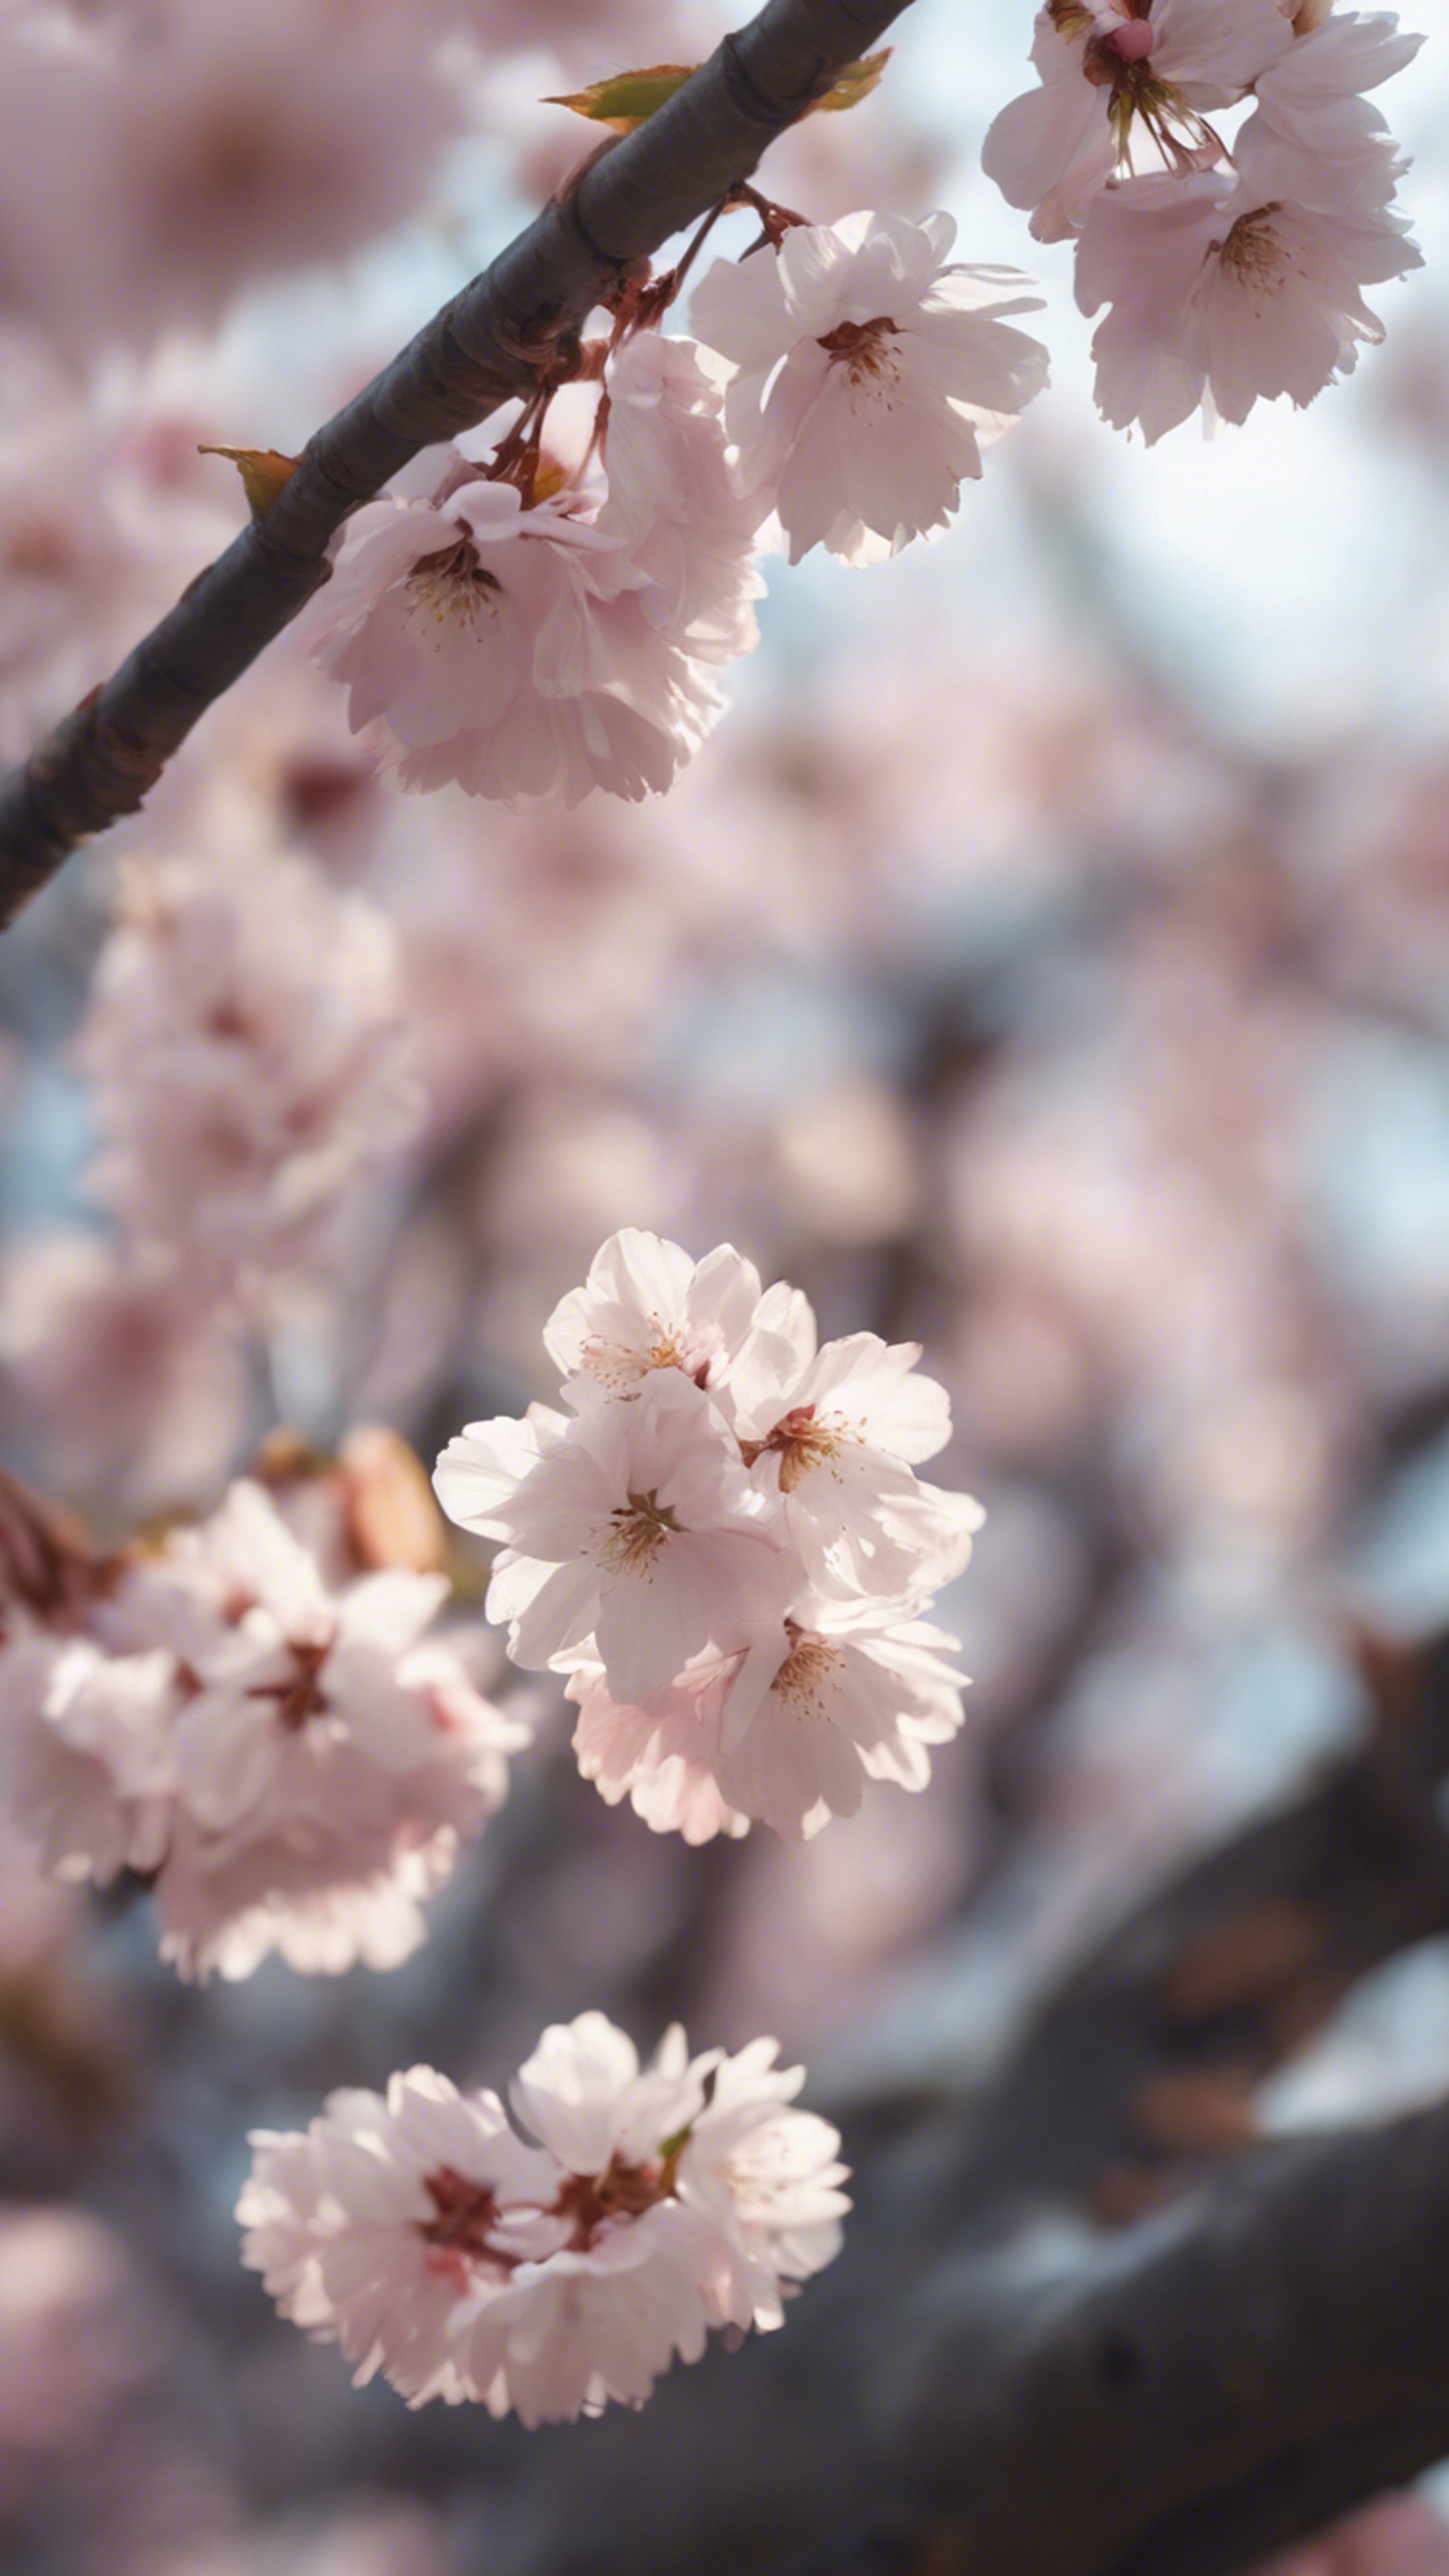 A close-up view of cherry blossom petals falling gently from the tree.壁紙[73cf20157d554b6991b4]